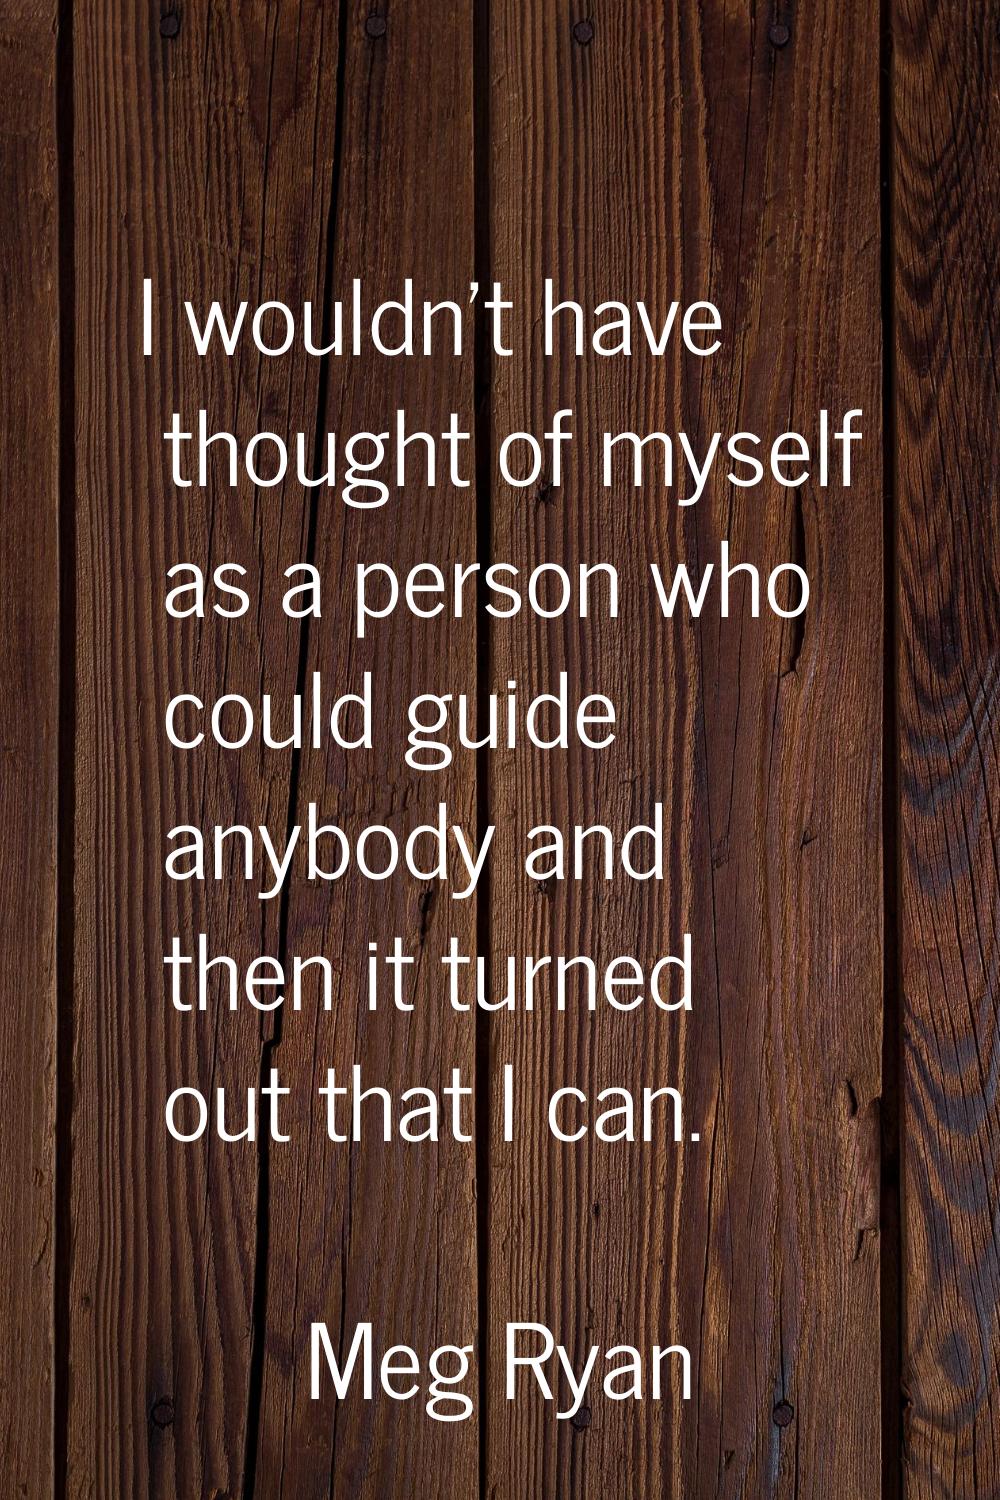 I wouldn't have thought of myself as a person who could guide anybody and then it turned out that I